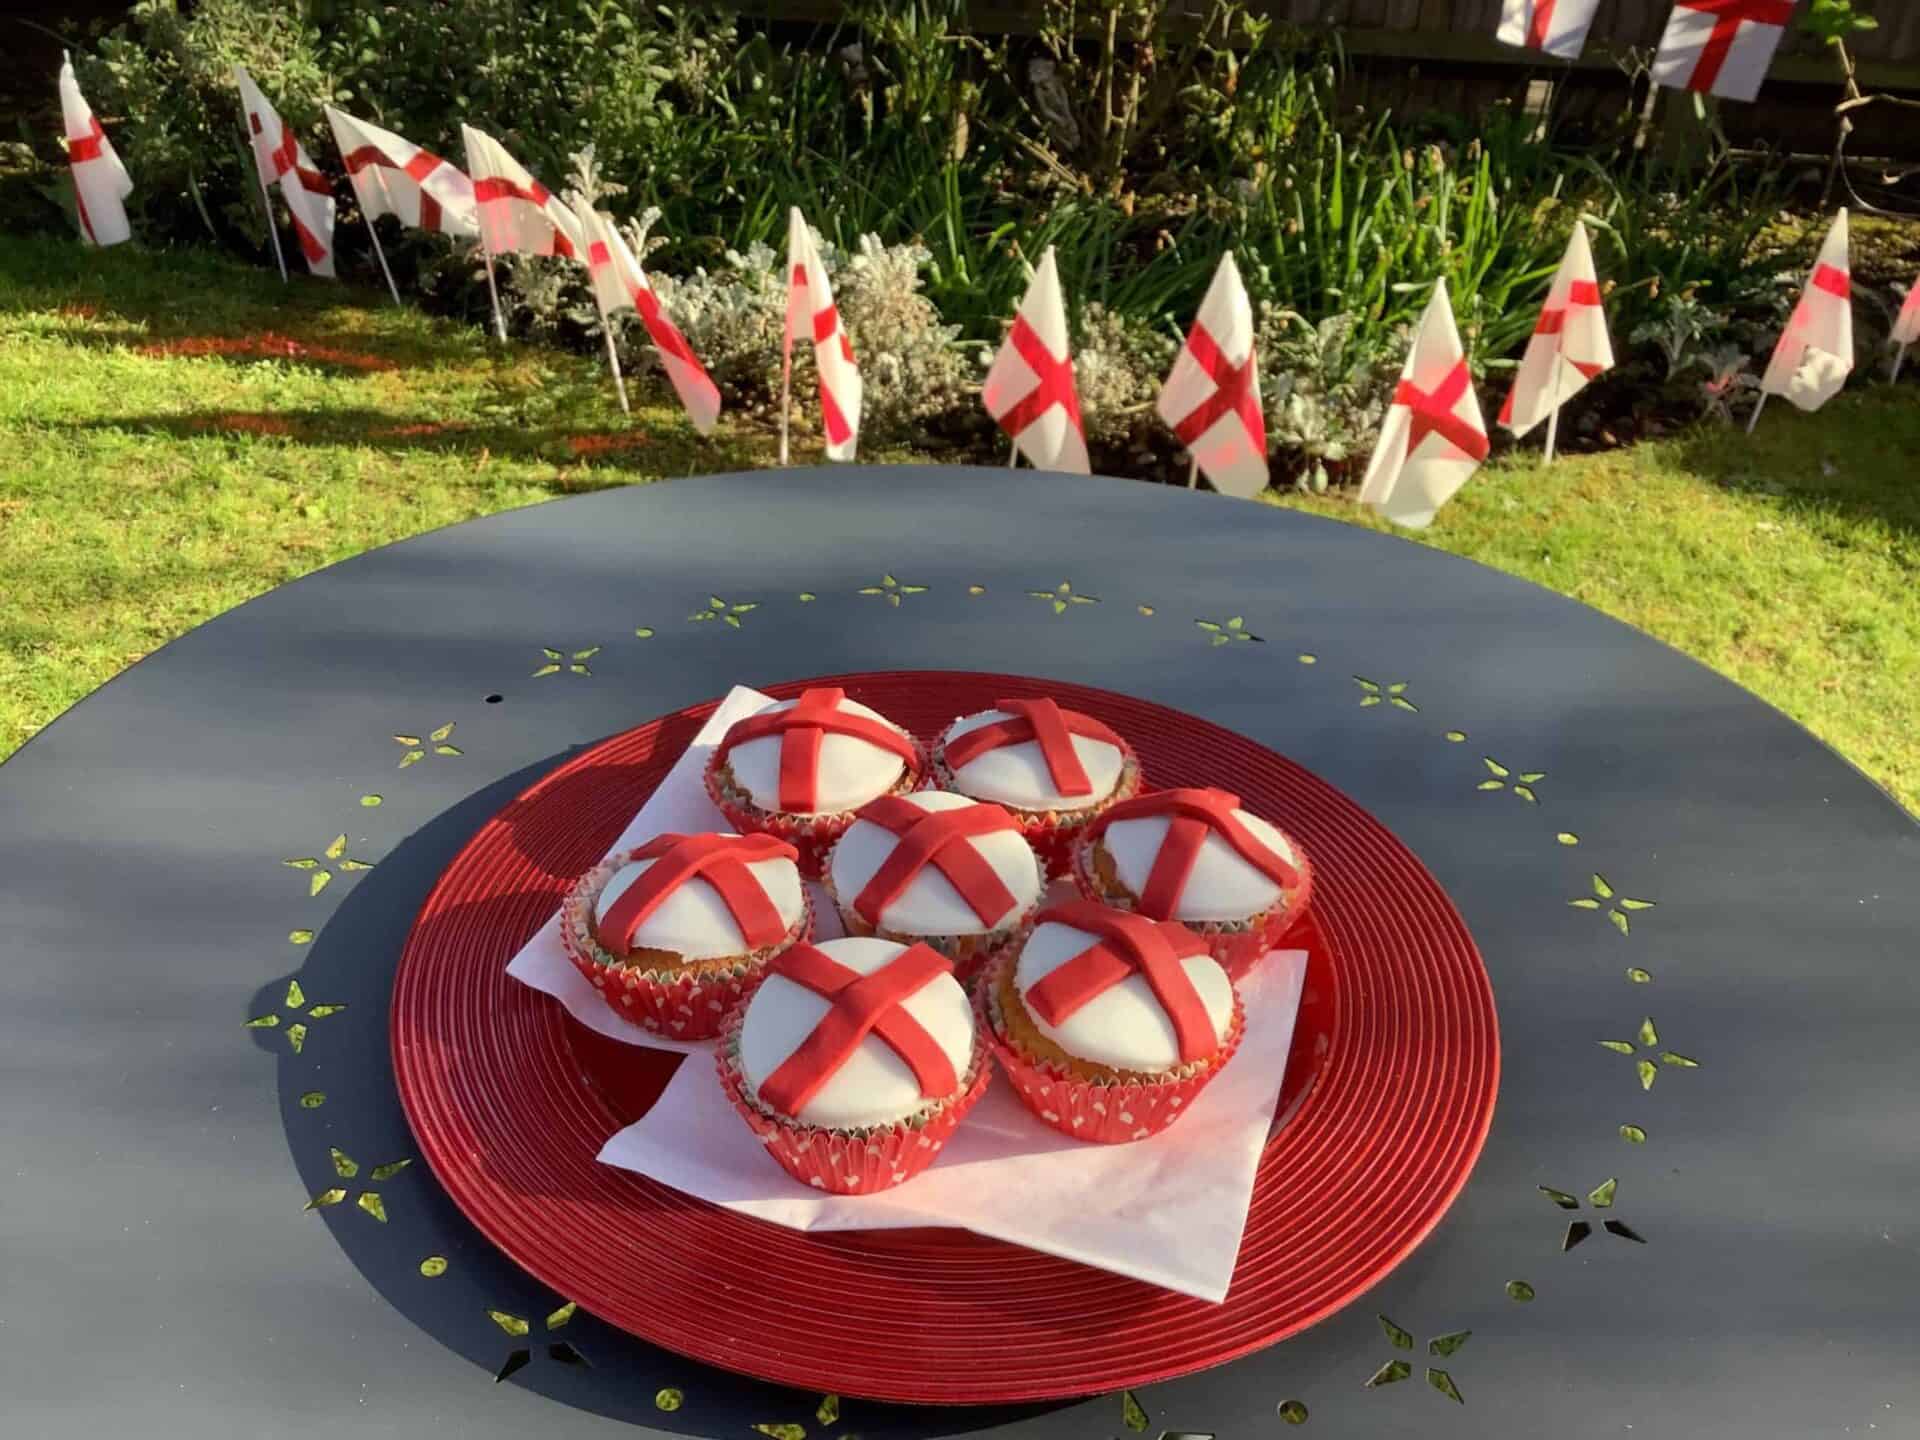 A festive outdoor table setting featuring a plate of cupcakes decorated with red and white icing to resemble the English flag, surrounded by a garden adorned with matching flag bunting, celebrating community events or national holiday.